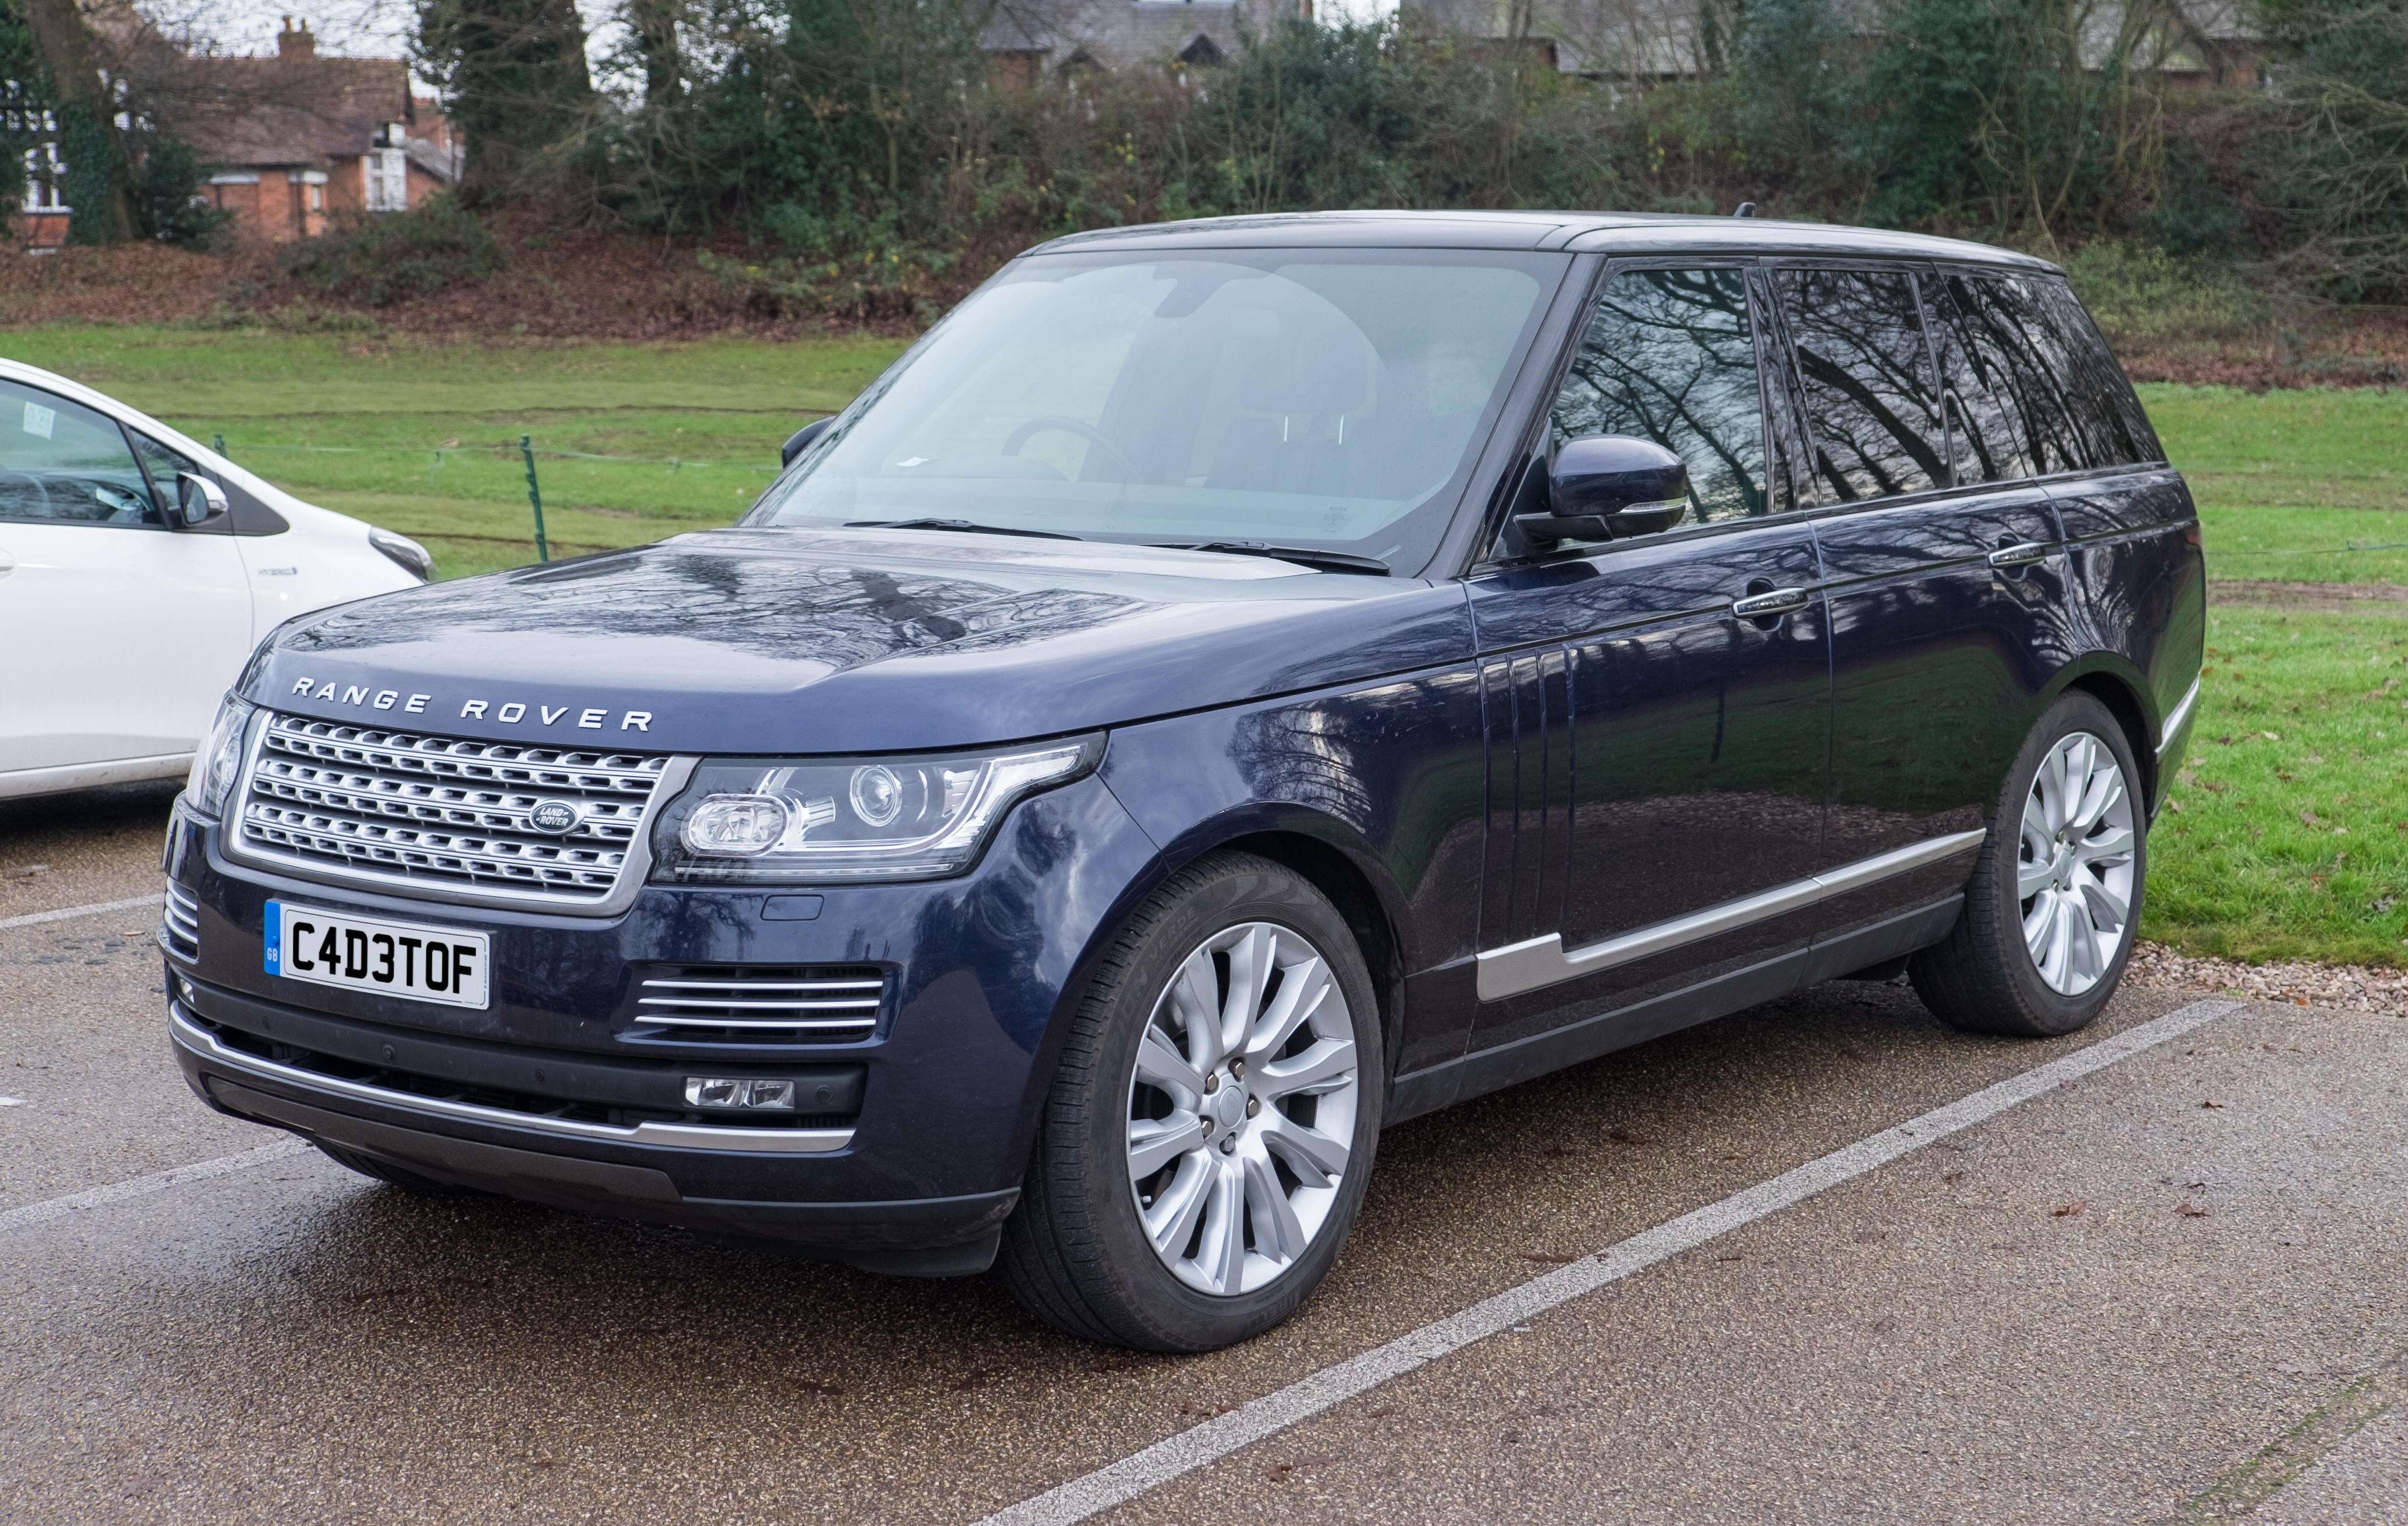 File:Land Rover Range Rover Autobiography 2016.jpg - Wikimedia Commons